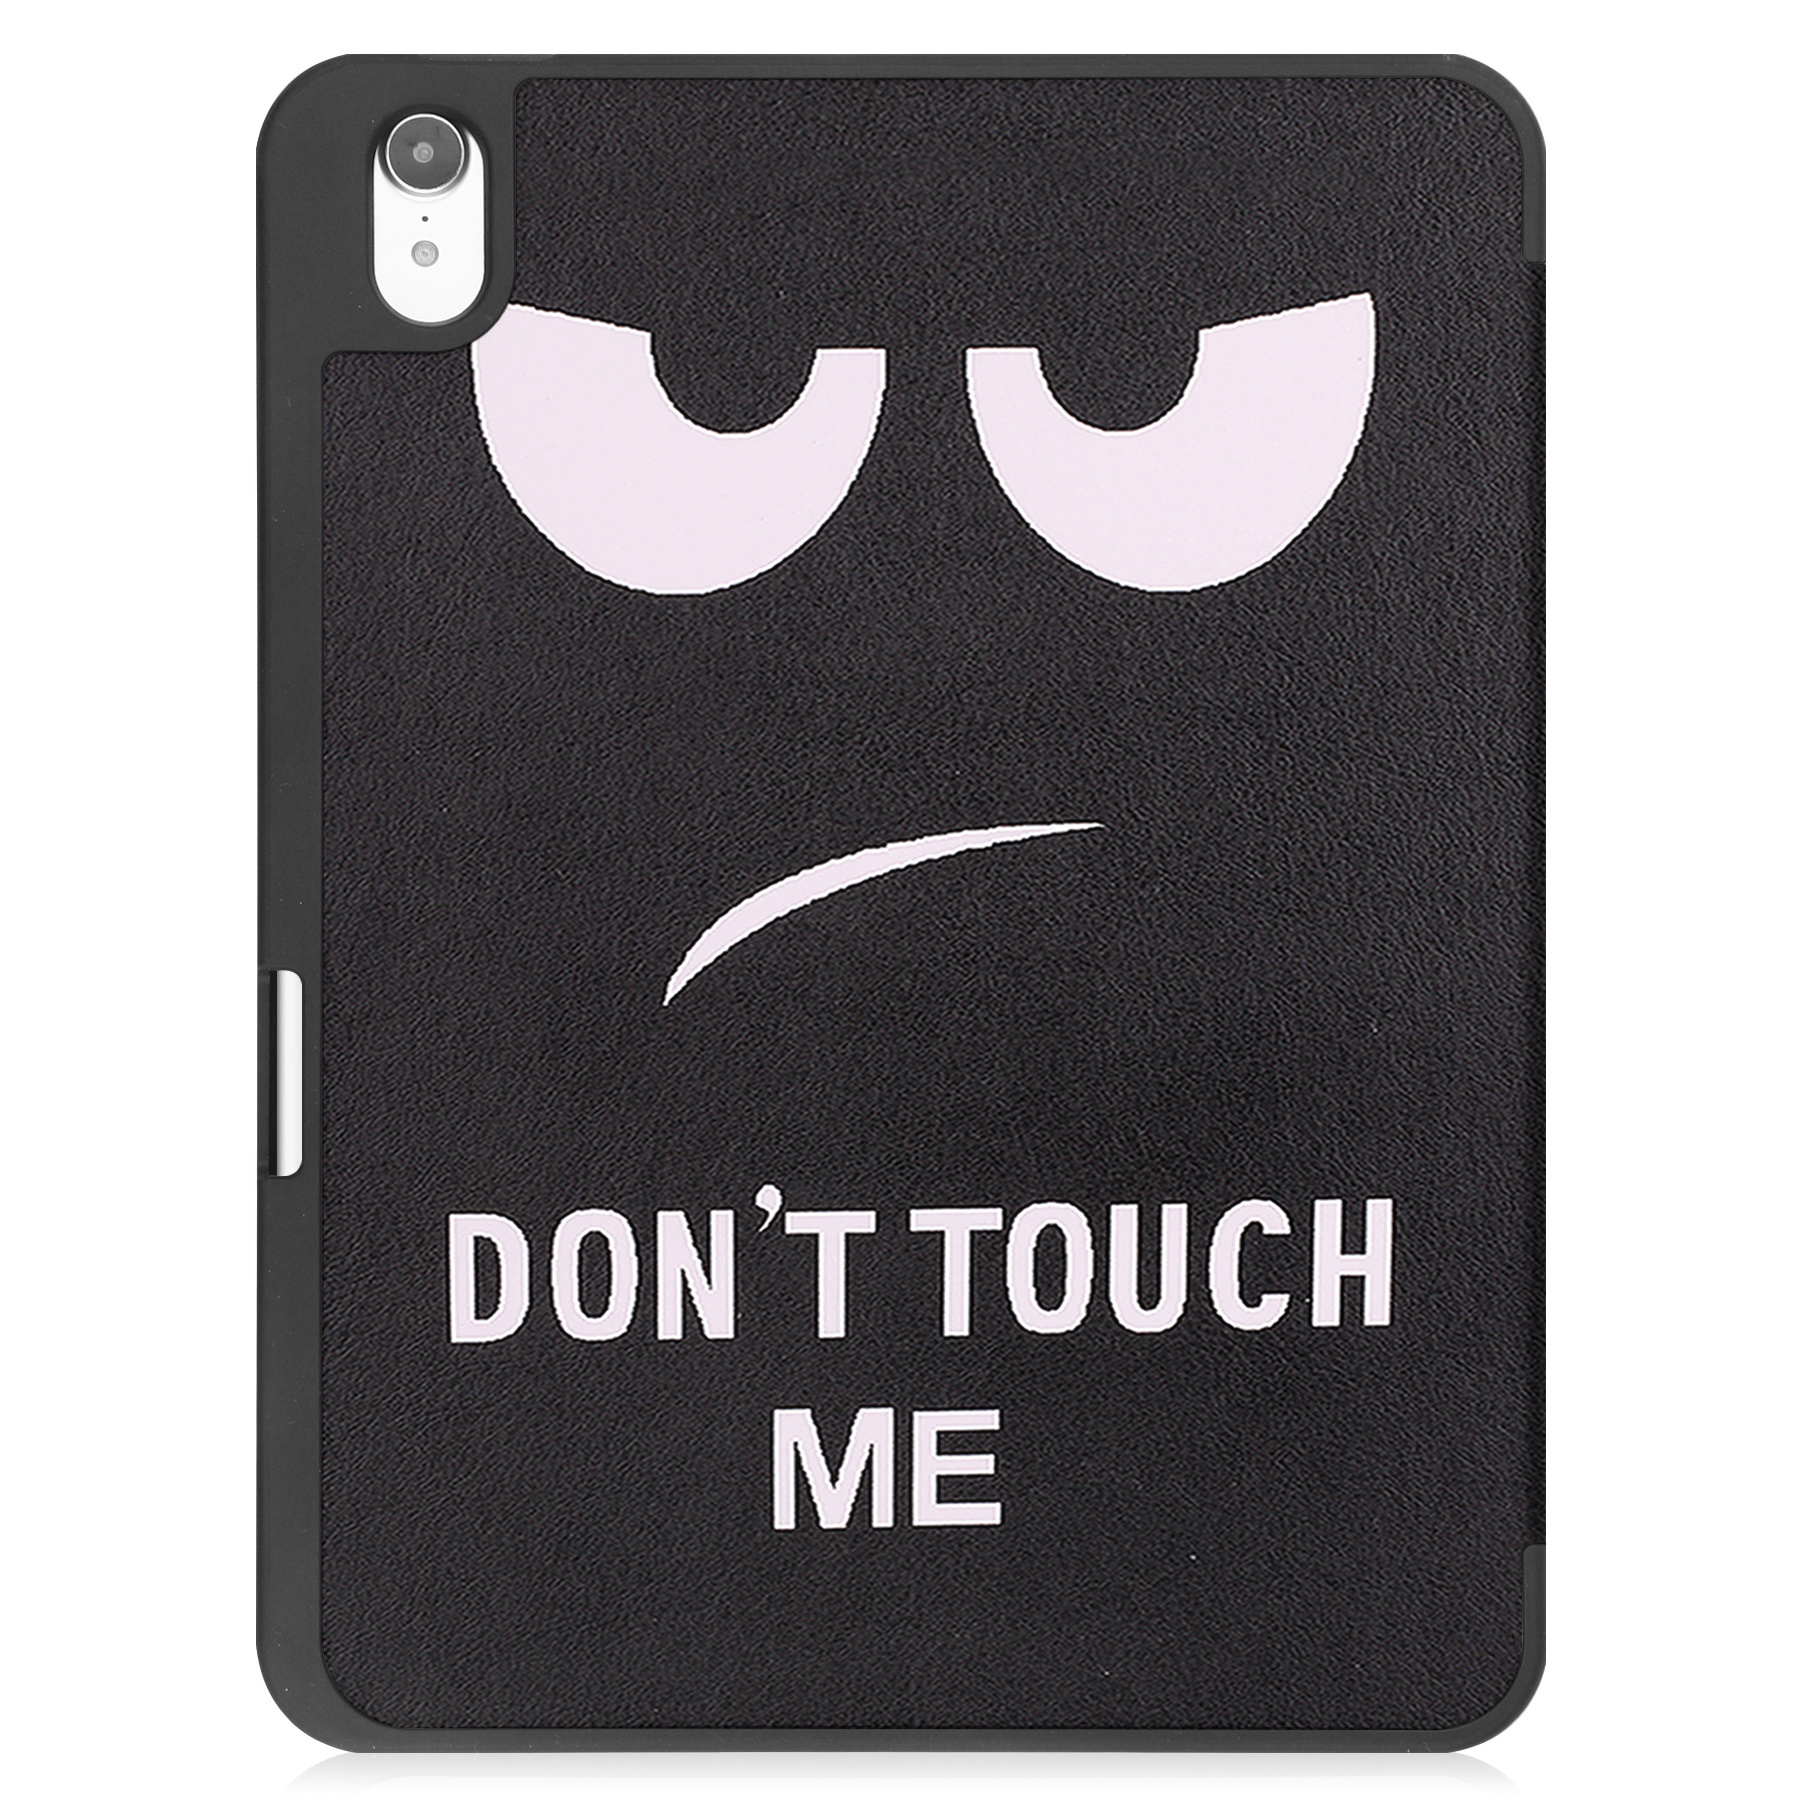 iPad 10 Hoes Case Hoesje Hard Cover Met Screenprotector - iPad 10 2022 Hoesje Bookcase Uitsparing Apple Pencil - Don't Touch Me